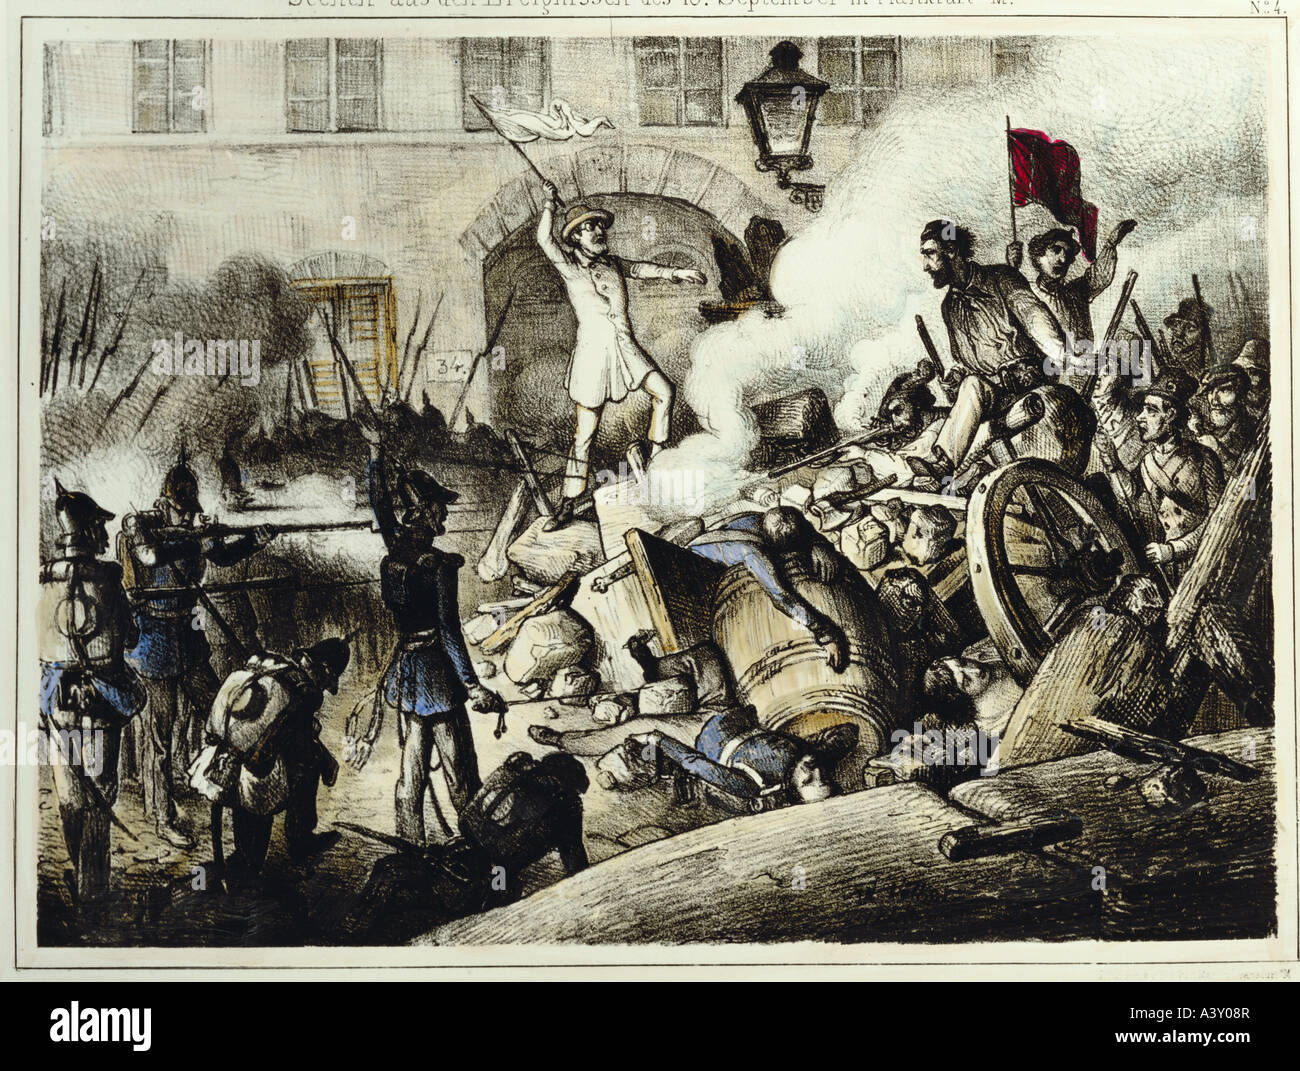 events, revolutions 1848 - 1849, Germany, Frankfurt, deputy Roessler proclaiming armistice, 10.9.1848, lithograph, E. May Publishing, mid 19th century, private collection, historic, historical, Hesse, street fight, barricade, revolutionsaries, Prussian soldiers, military, insurgence, insurgency, revolution, Rossler, Rössler, people, Stock Photo